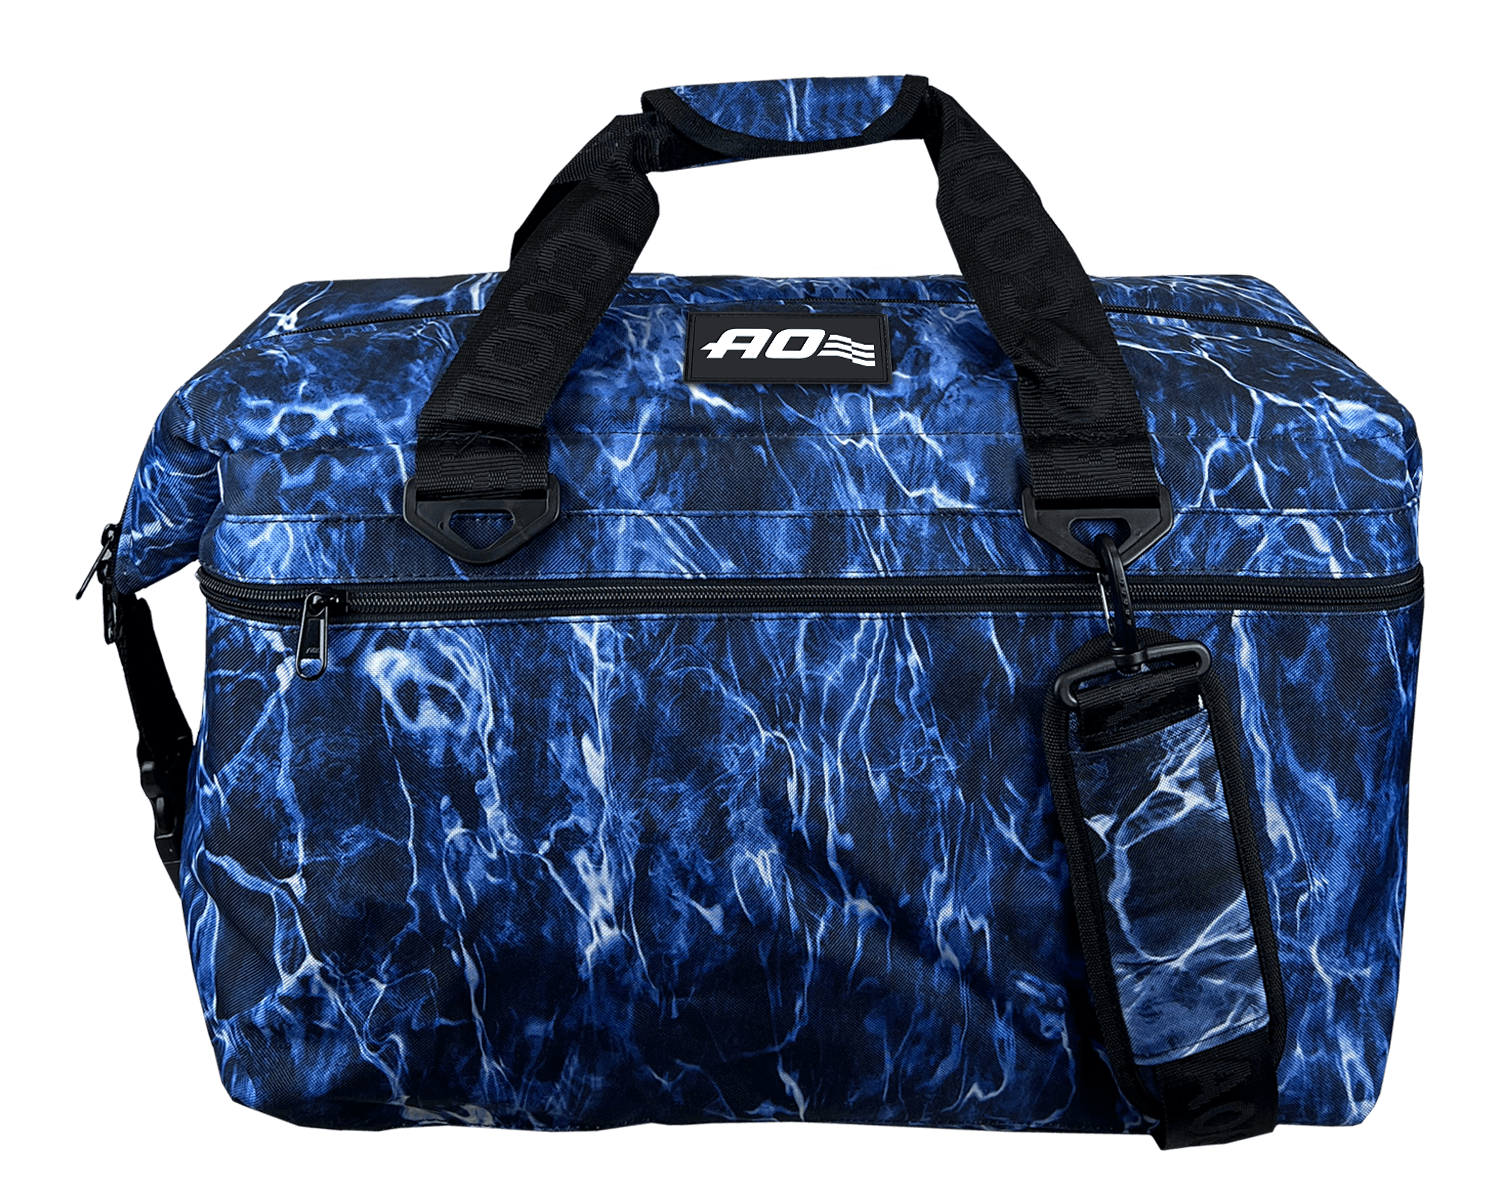 Mossy Oak Elements Series 36 Pack Cooler - AO Coolers